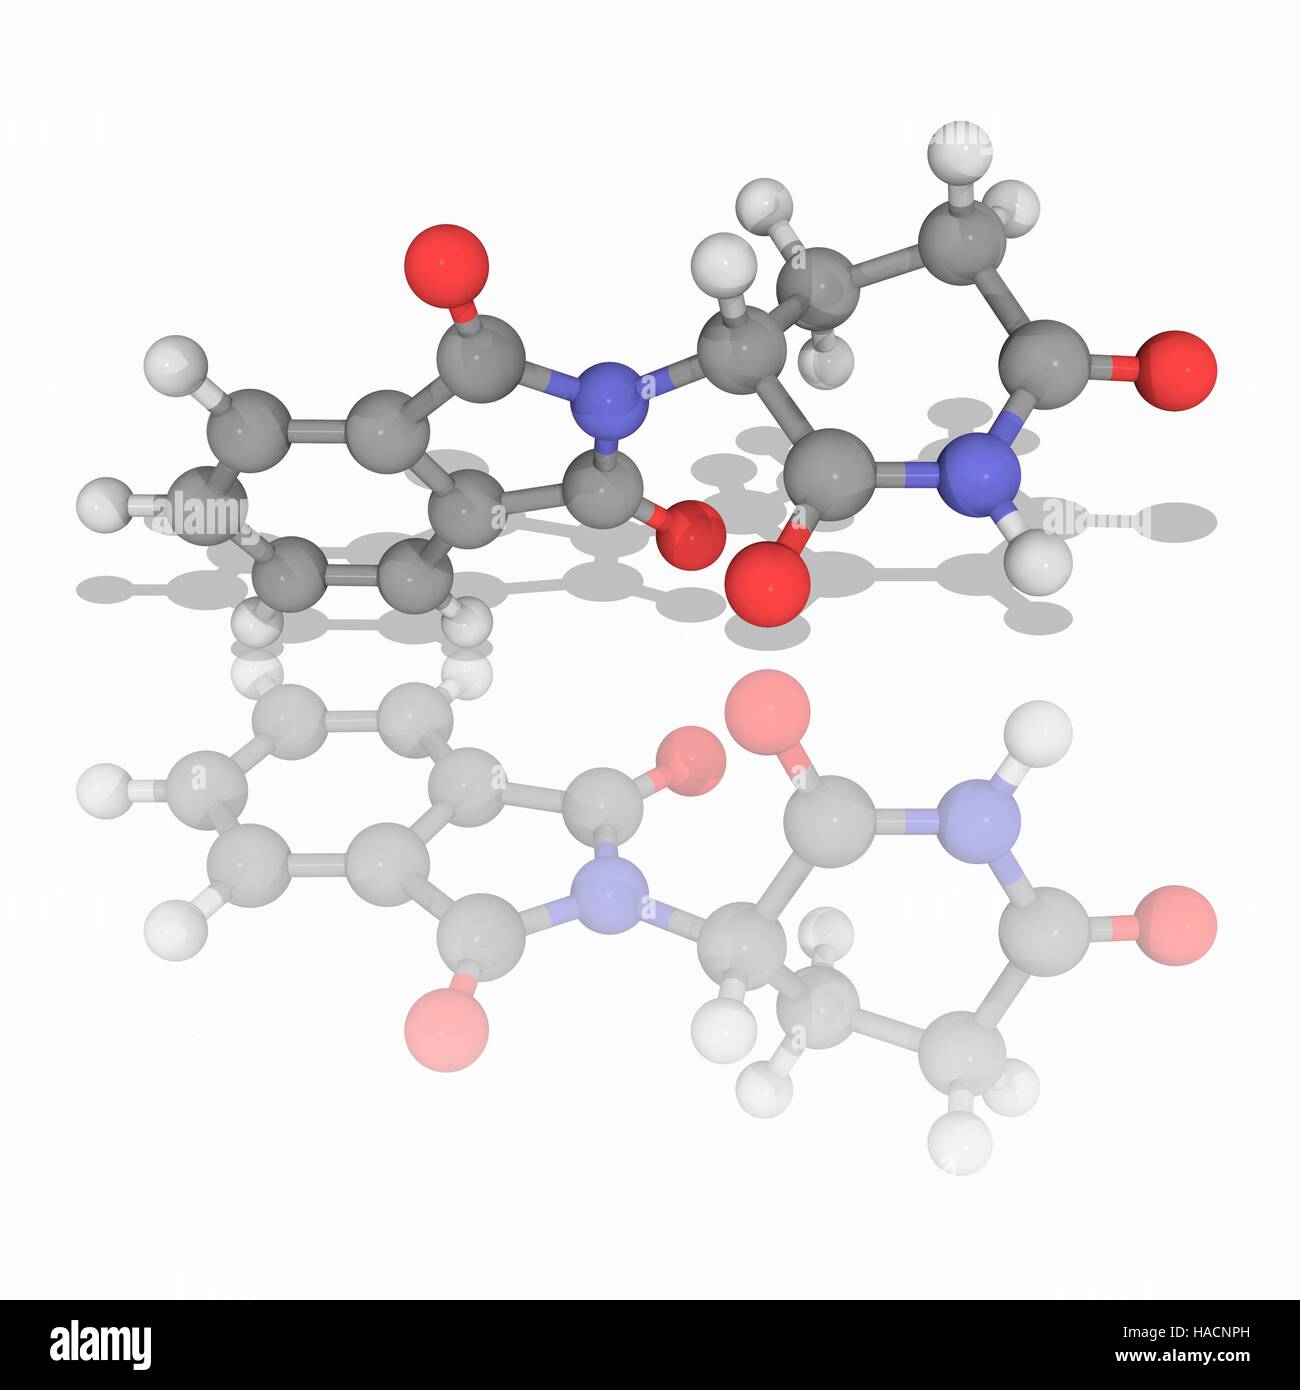 Thalidomide. Molecular model of the sedative drug thalidomide (C13.H10.N2.O4), infamous for the birth defects it caused in the late 1950s. Atoms are represented as spheres and are colour-coded: carbon (grey), hydrogen (white), nitrogen (blue) and oxygen (red). Illustration. Stock Photo